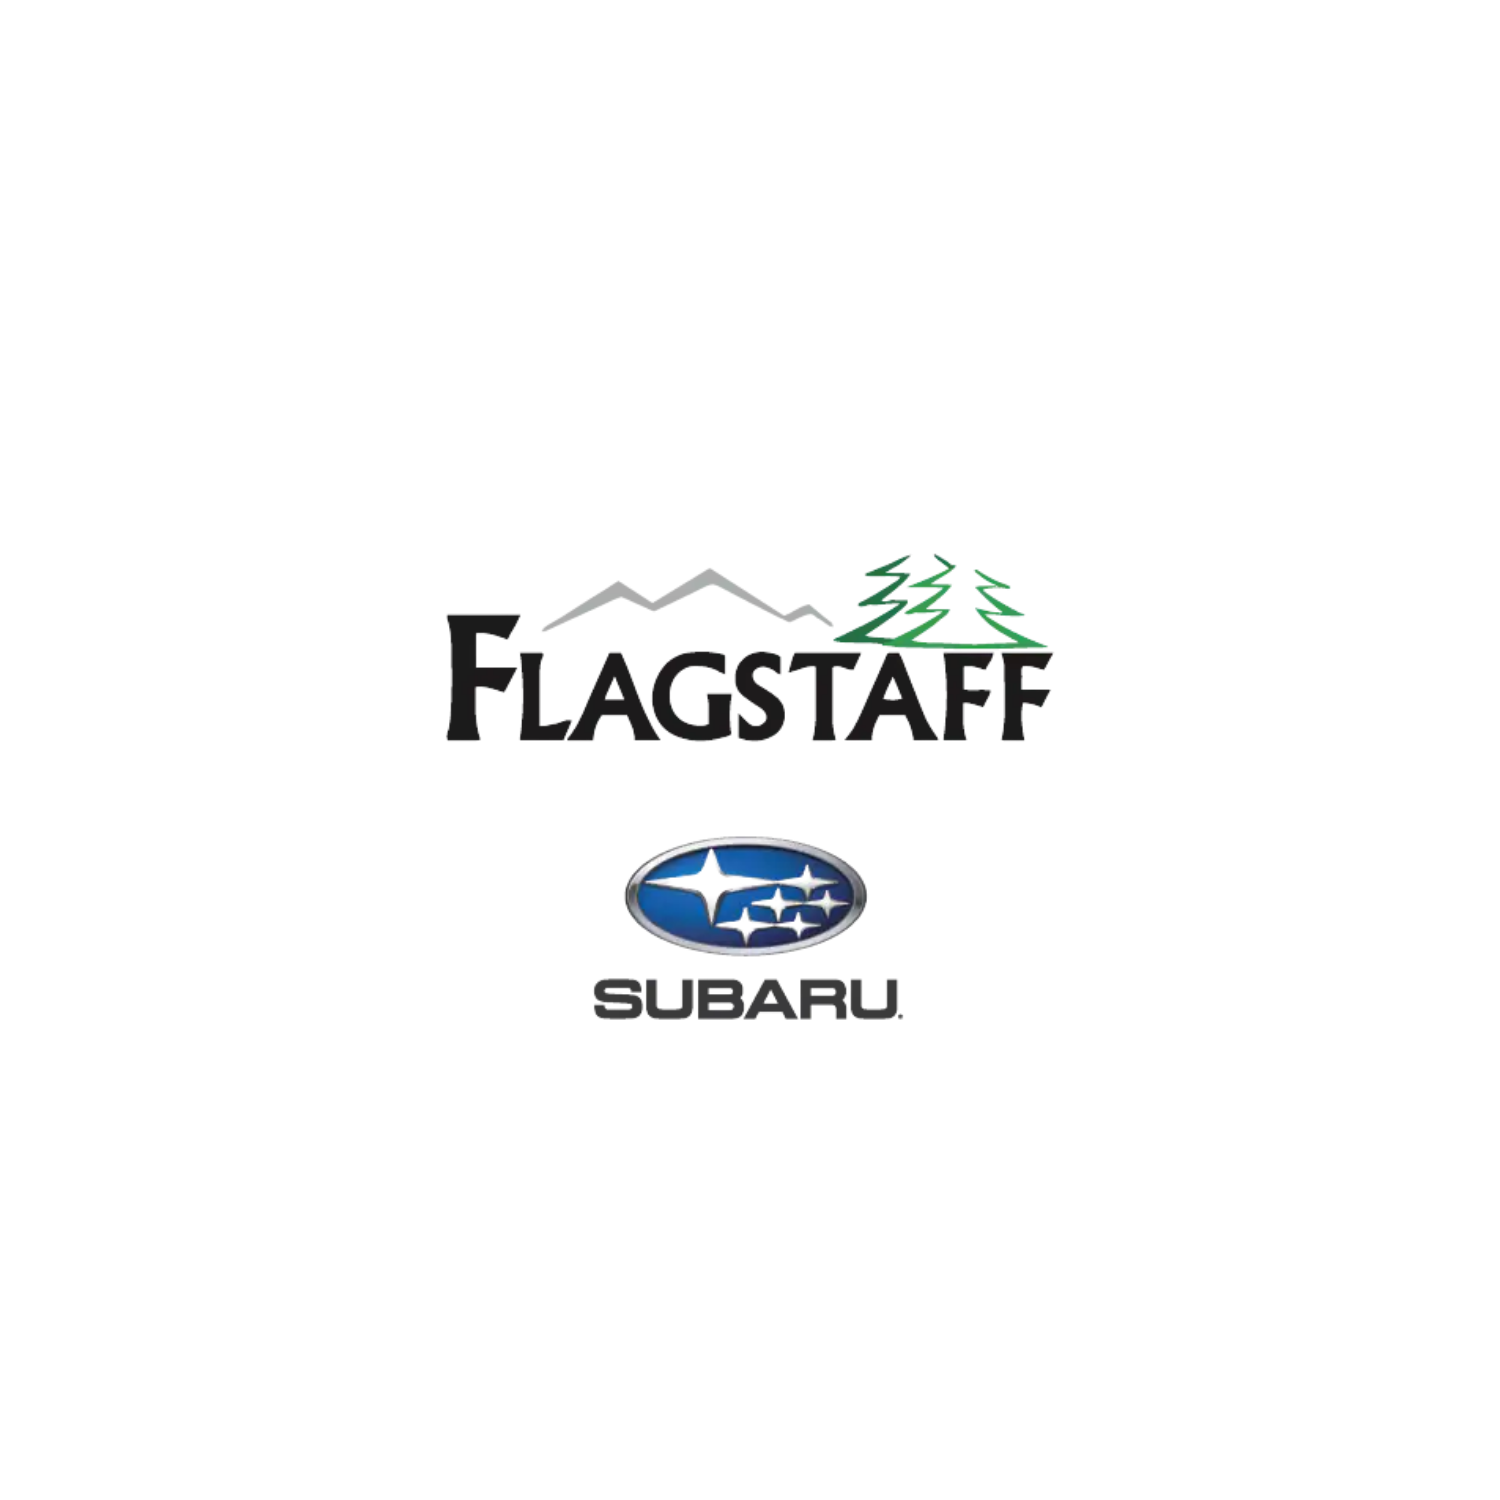 Flagstaff Subaru is proud to present its Second Annual Candy Cane Lane Drive-Thru on Saturday, December 4, 2021 from 5:30 p.m. to 9:30 p.m. at 4910 E. Marketplace Drive.